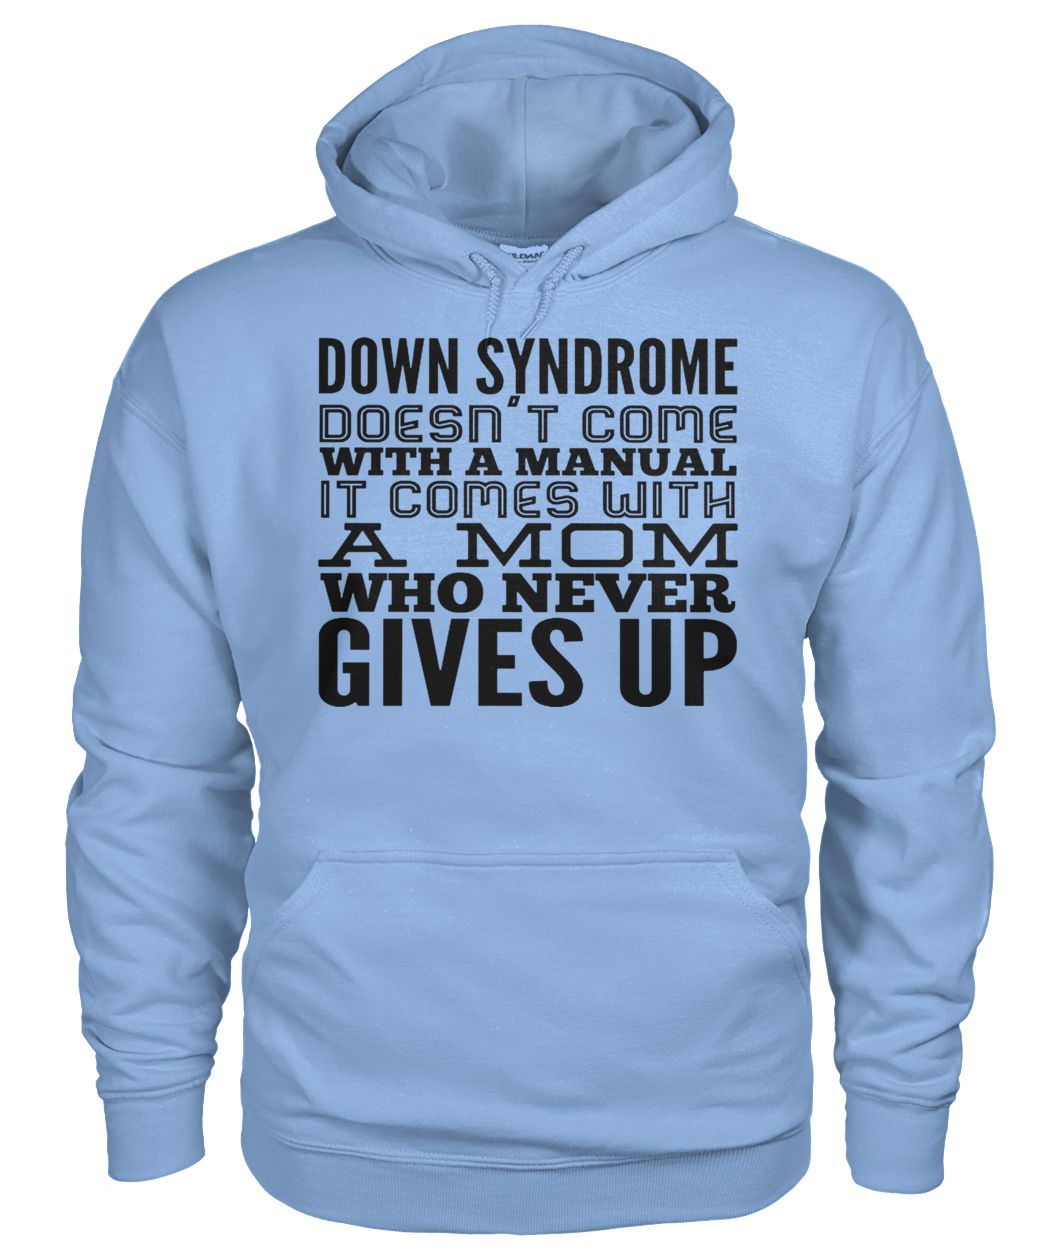 Down syndrome doesn't come with a manual gildan hoodie